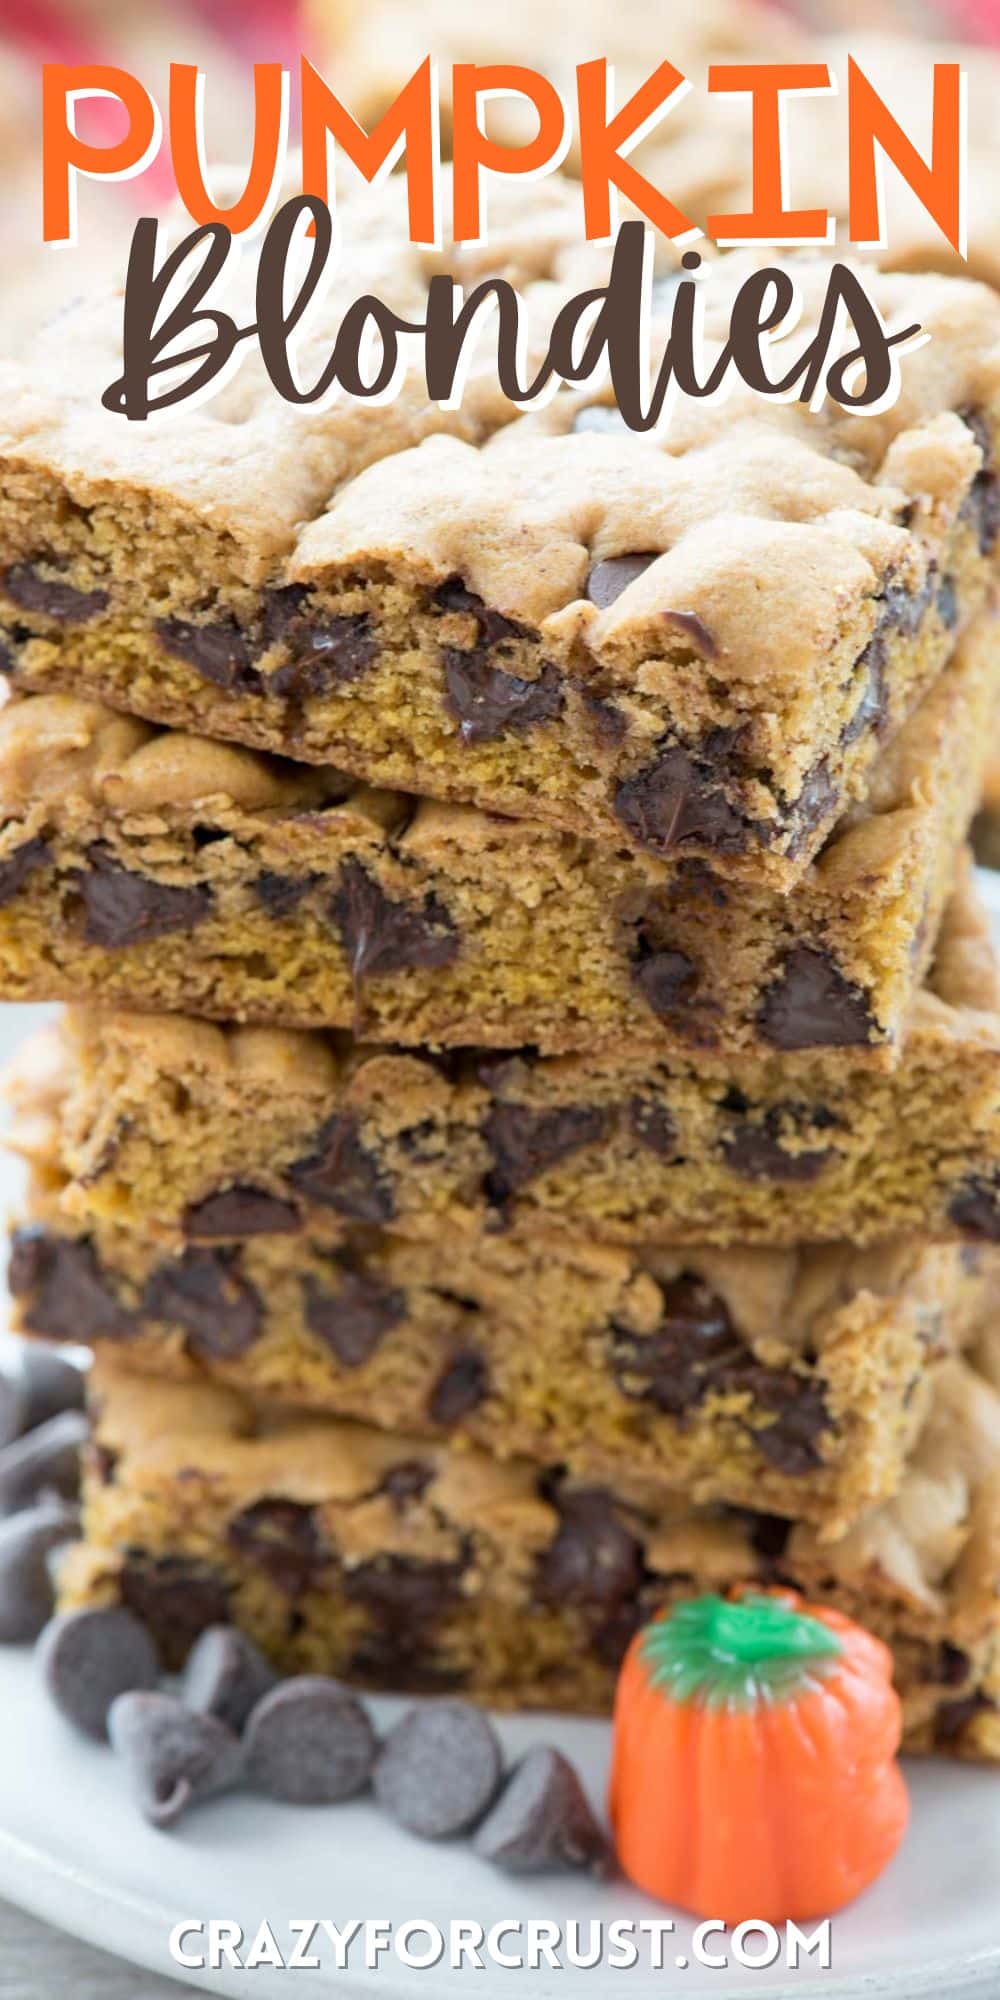 stacked pumpkin blondies with chocolate chips baked in with words on the image.